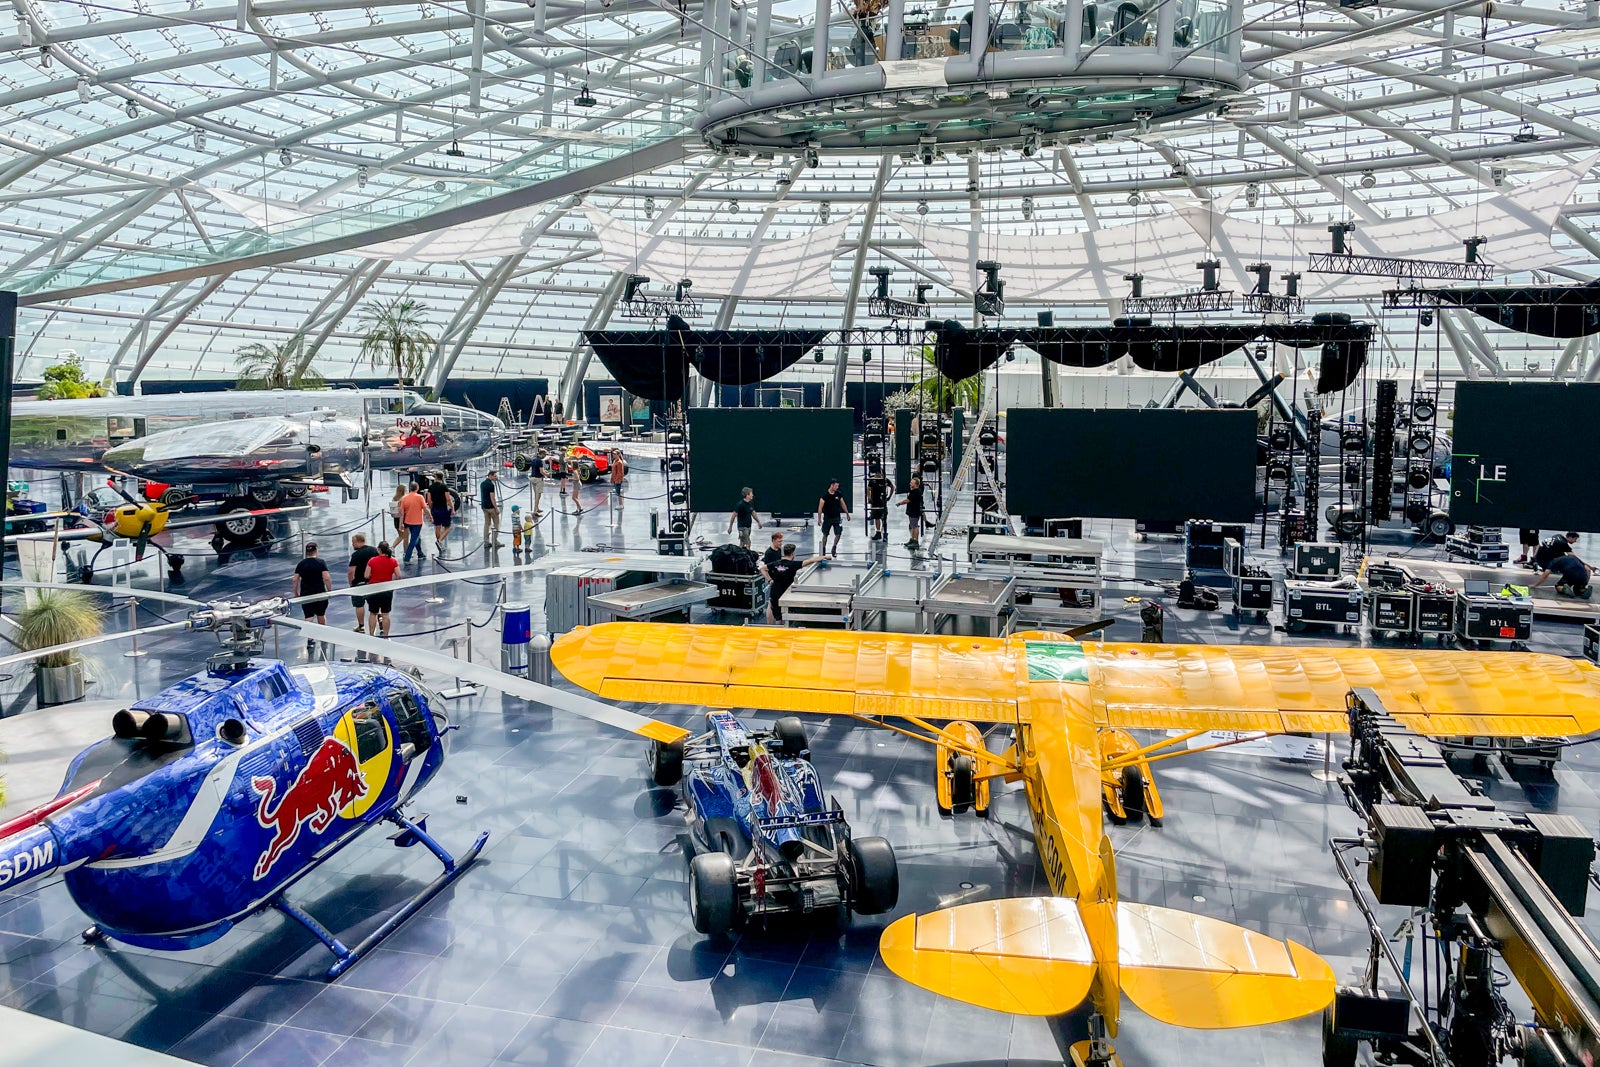 Inside Red Bull's Hangar-7: A visit to the Austrian home of the Flying Bulls The Points Guy